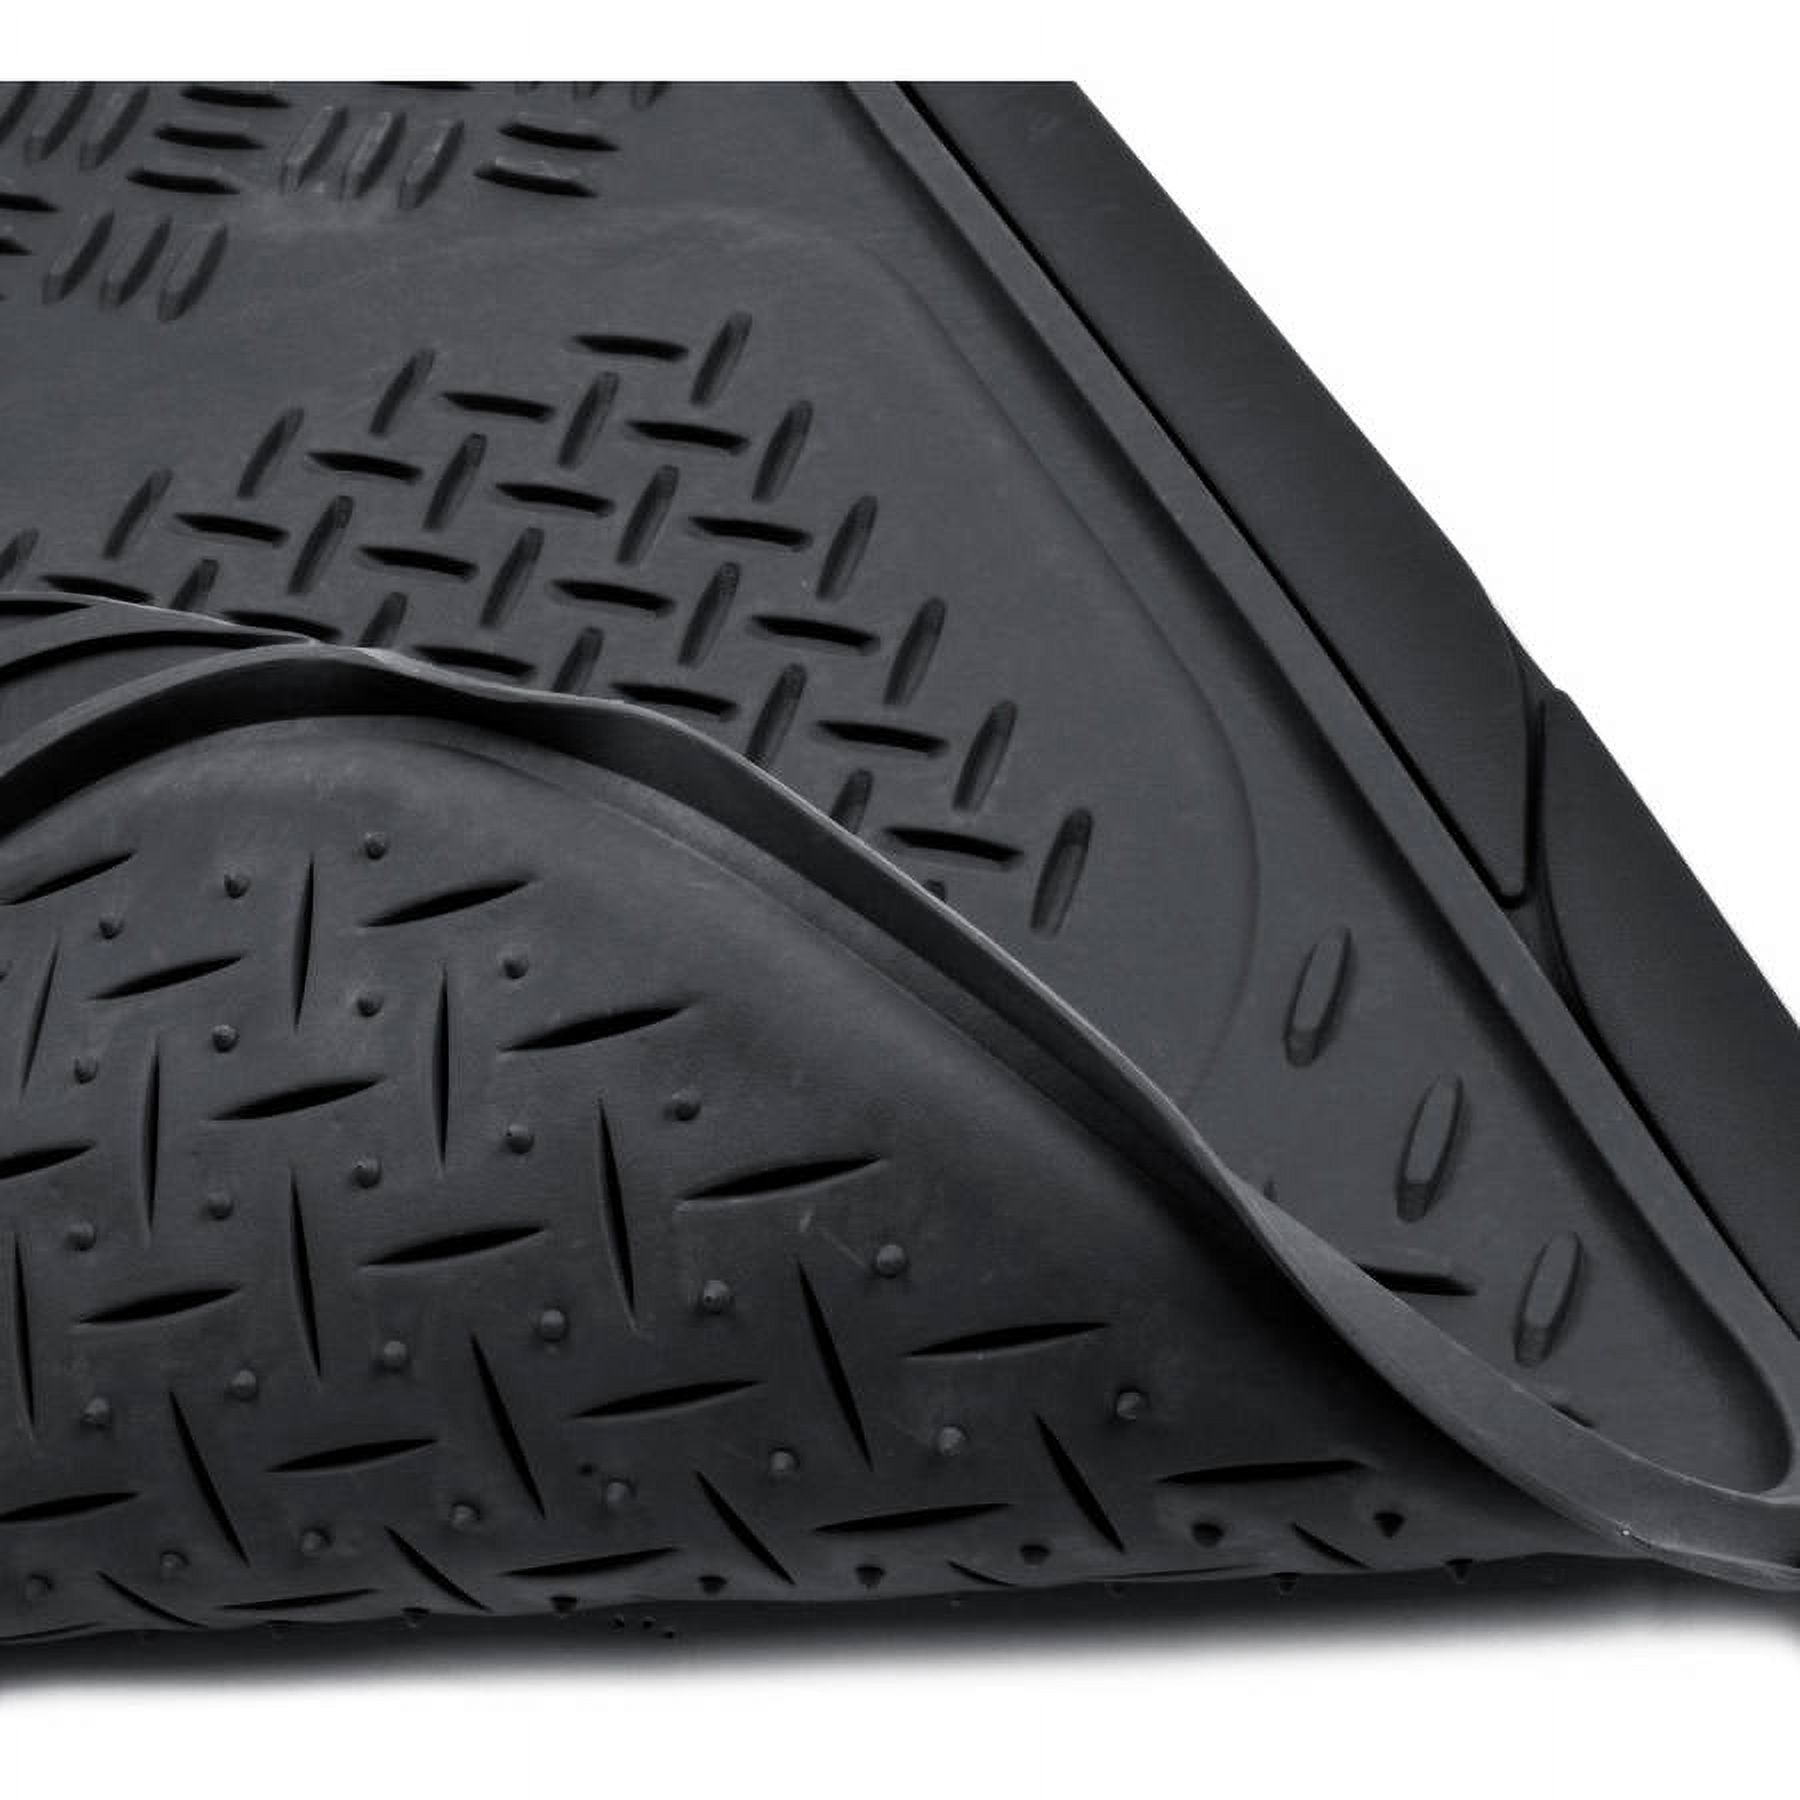 BDK MT-713-BK Diamond All-Weather Rubber Floor Mats for Car, SUV and Truck,  Trimmable, Heavy Duty